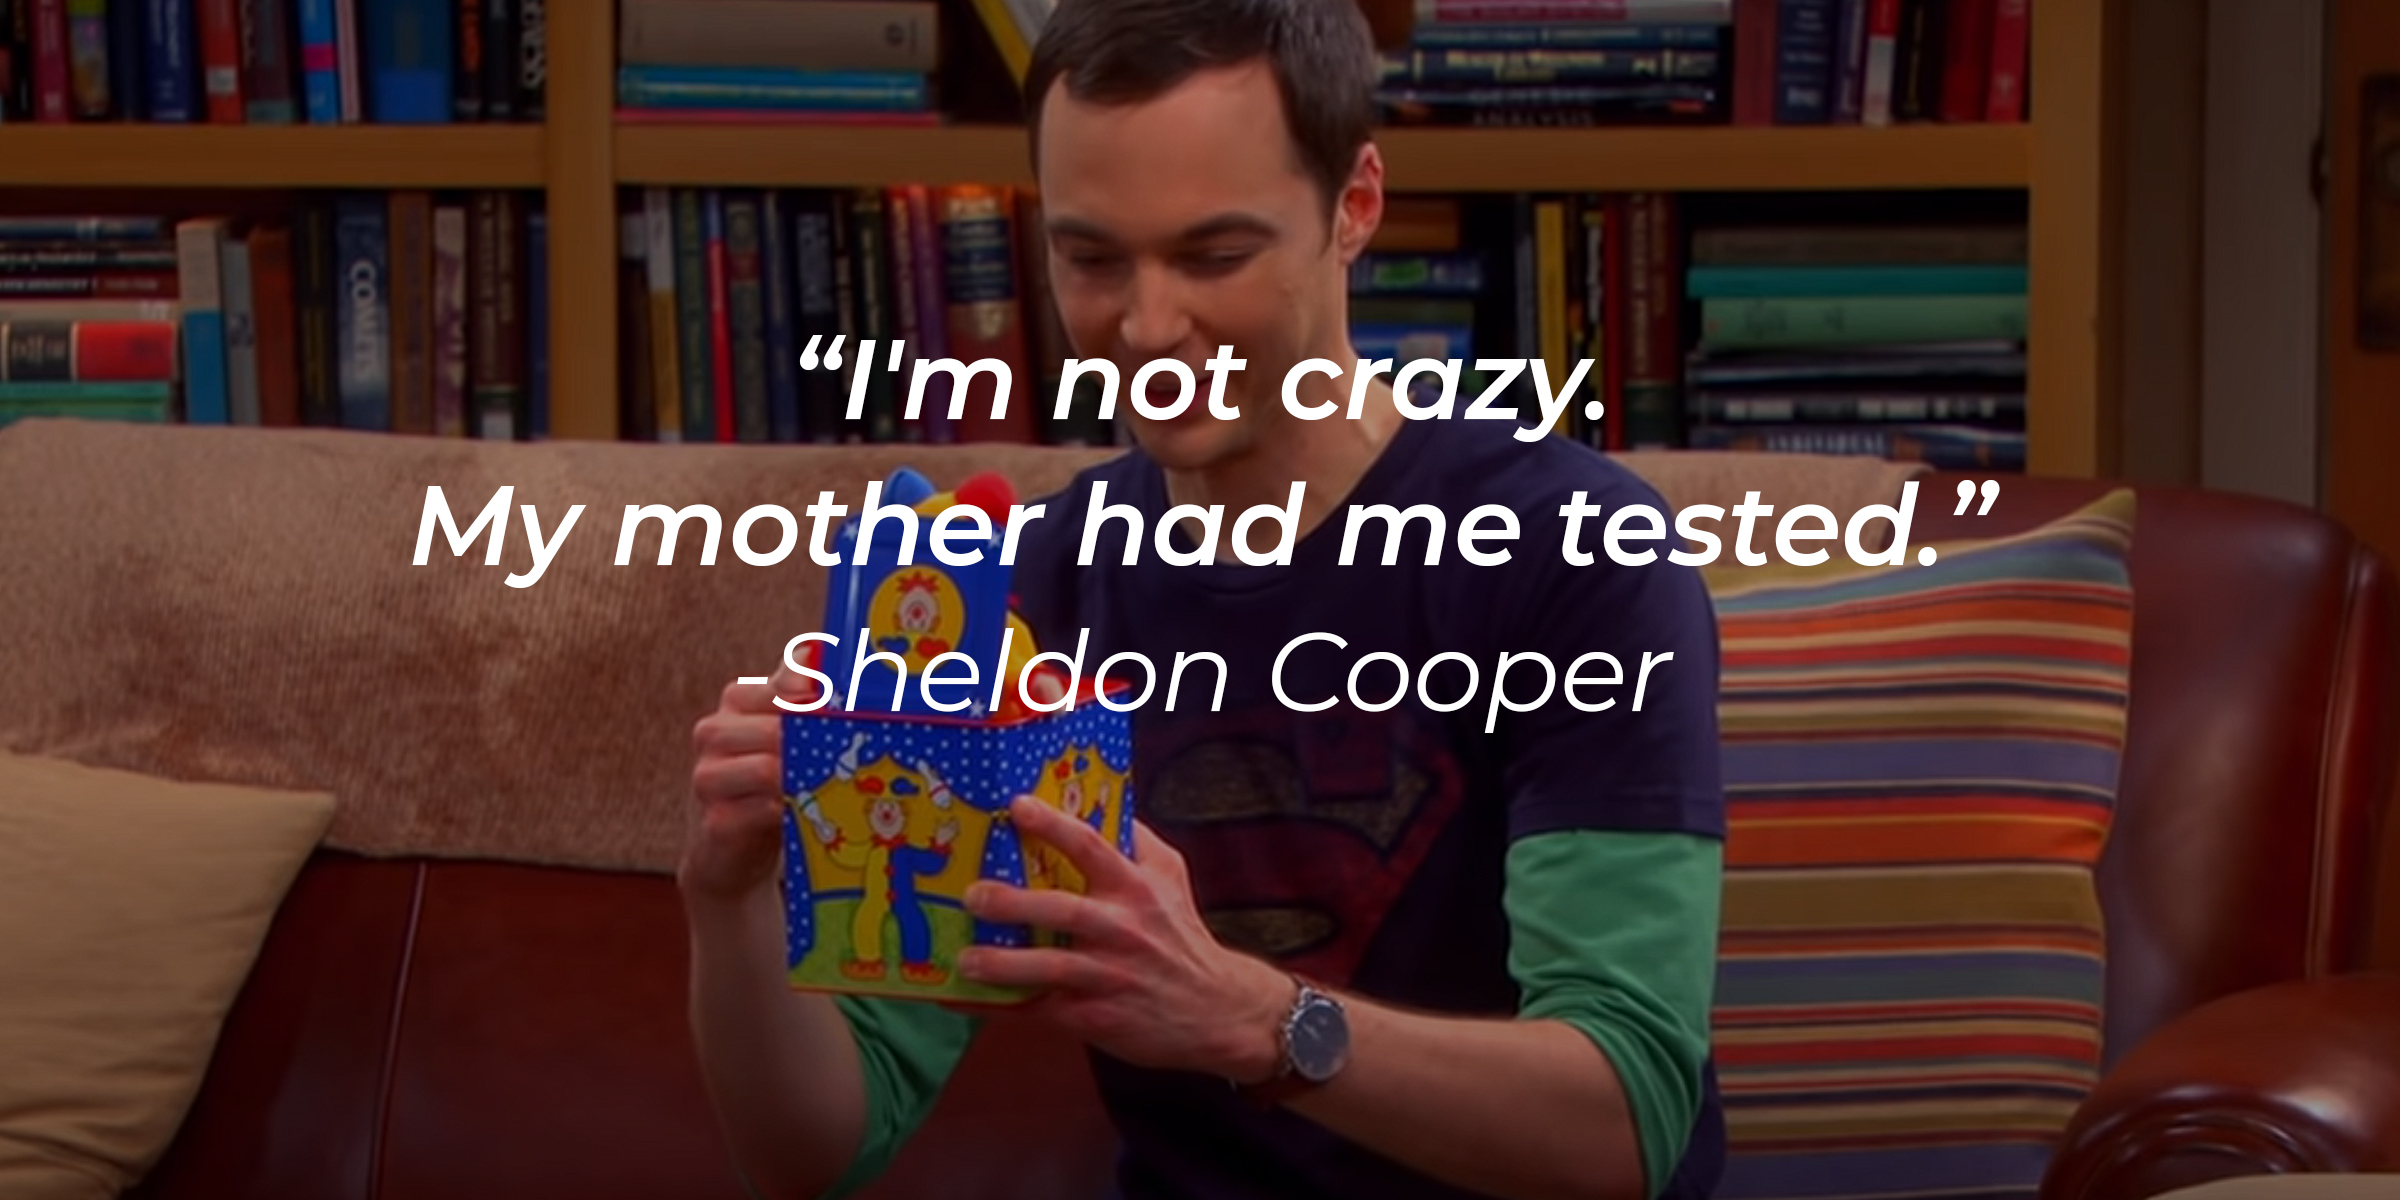 A photo of Sheldon Cooper with the quote: "I'm not crazy. My mother had me tested." | Source: youtube.com/warnerbrostv